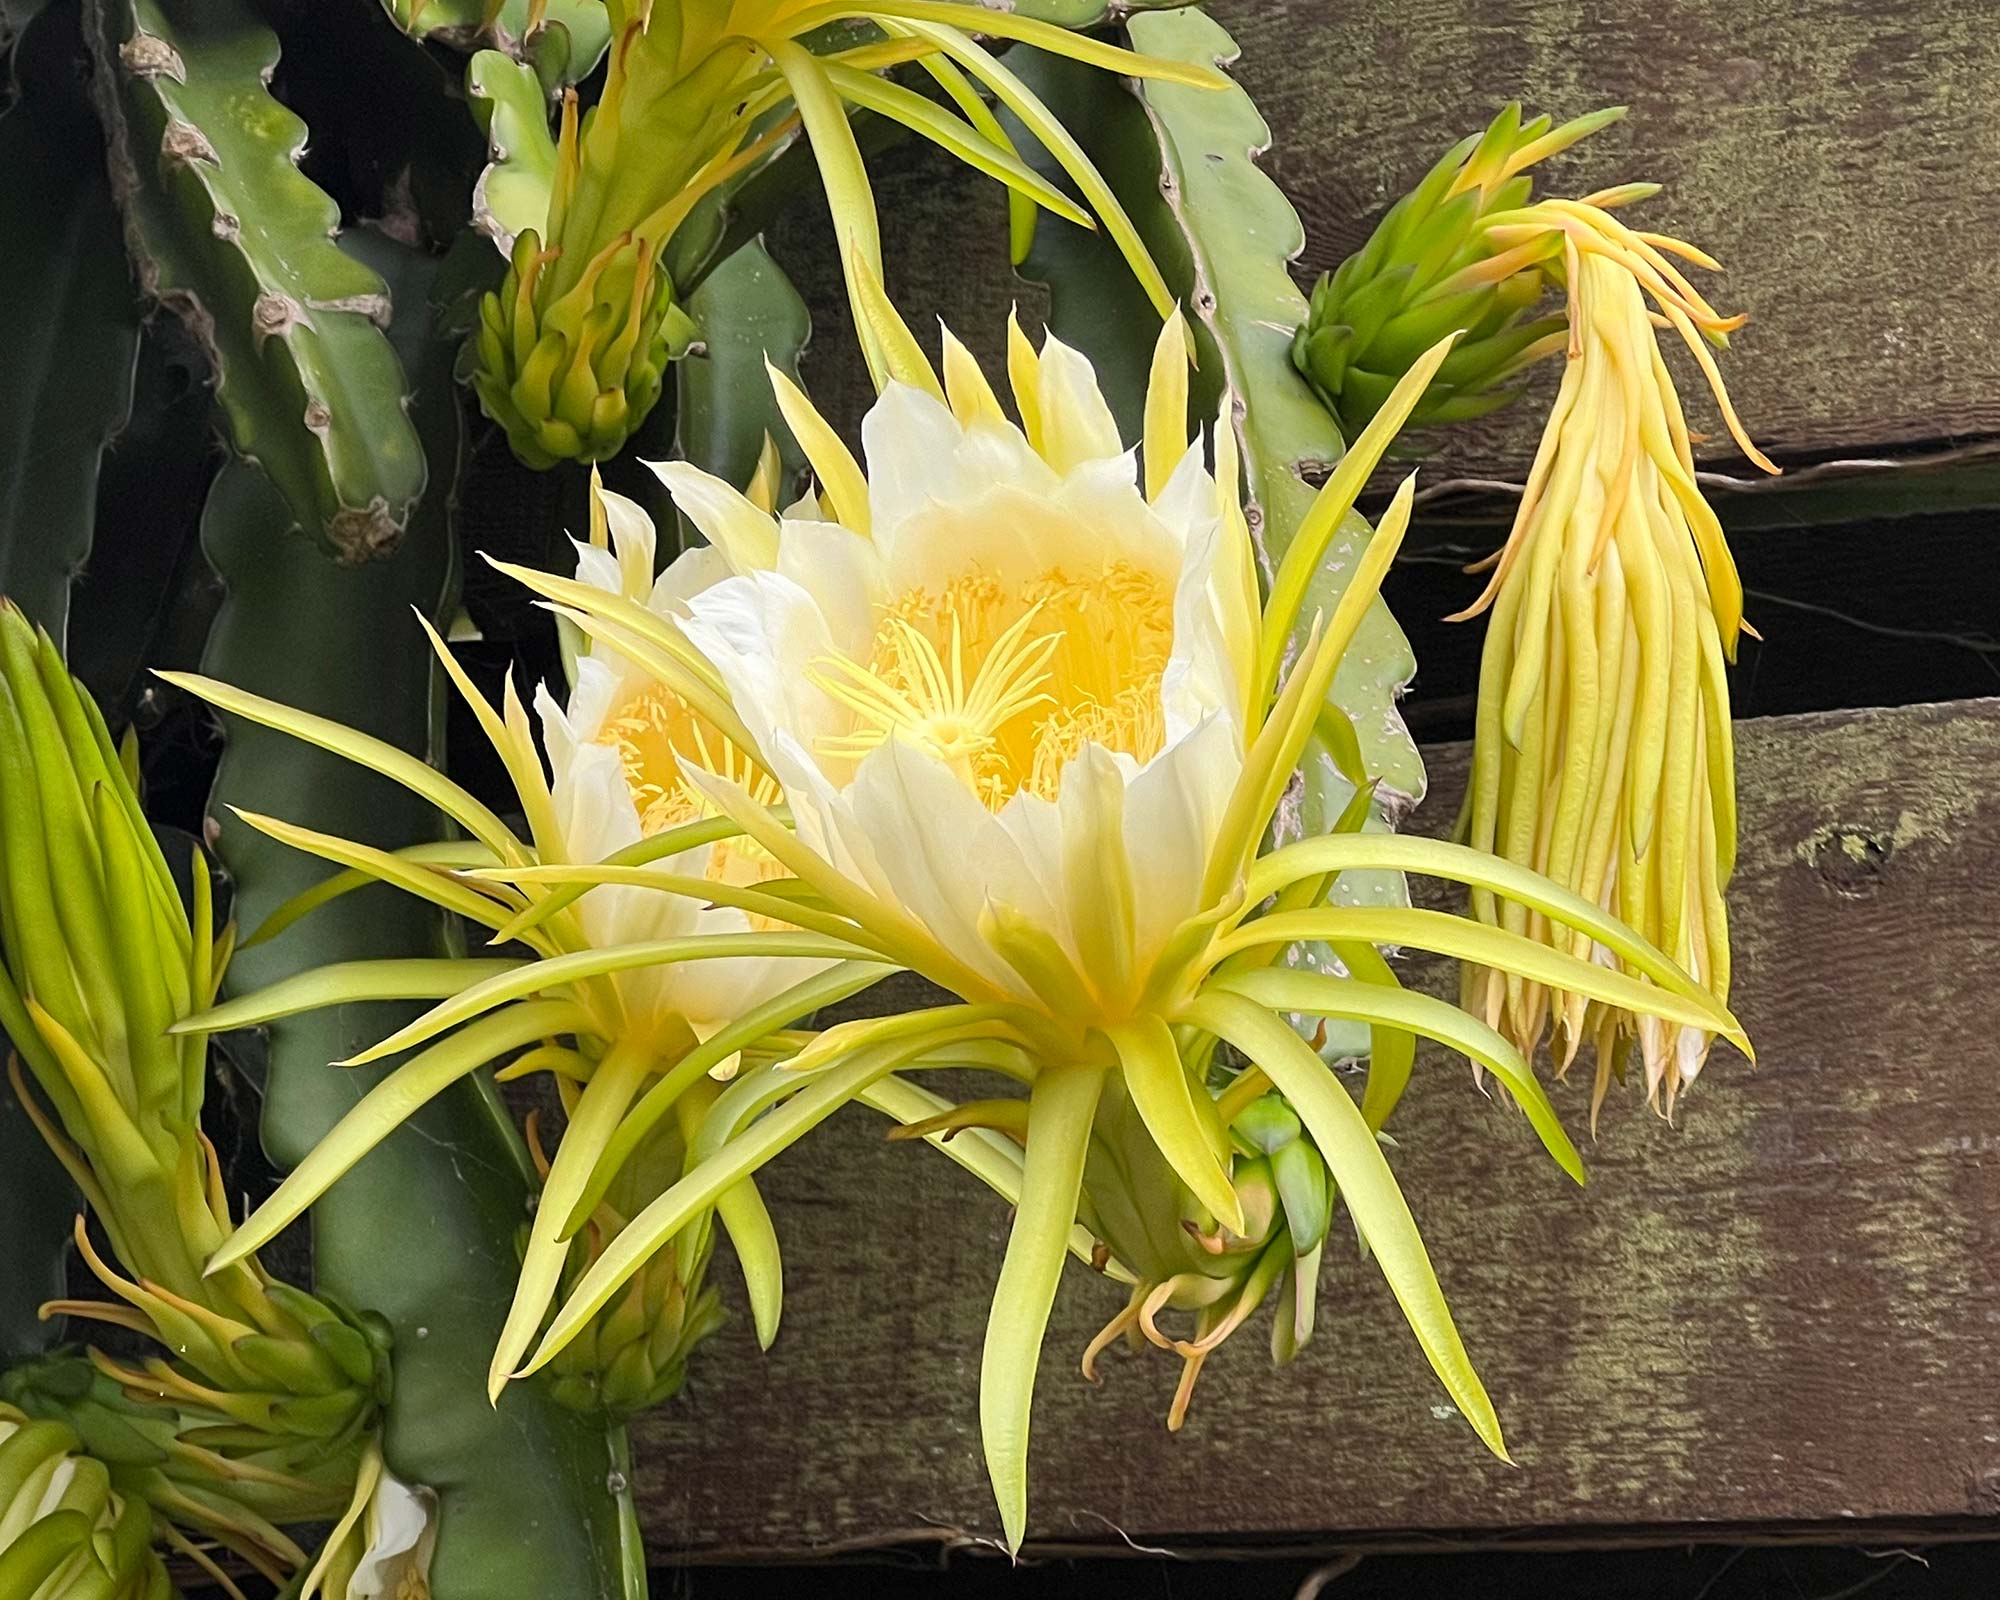 Hylocereus undatus - unfortunately these beautiful yellow flowers last for less than 1 day